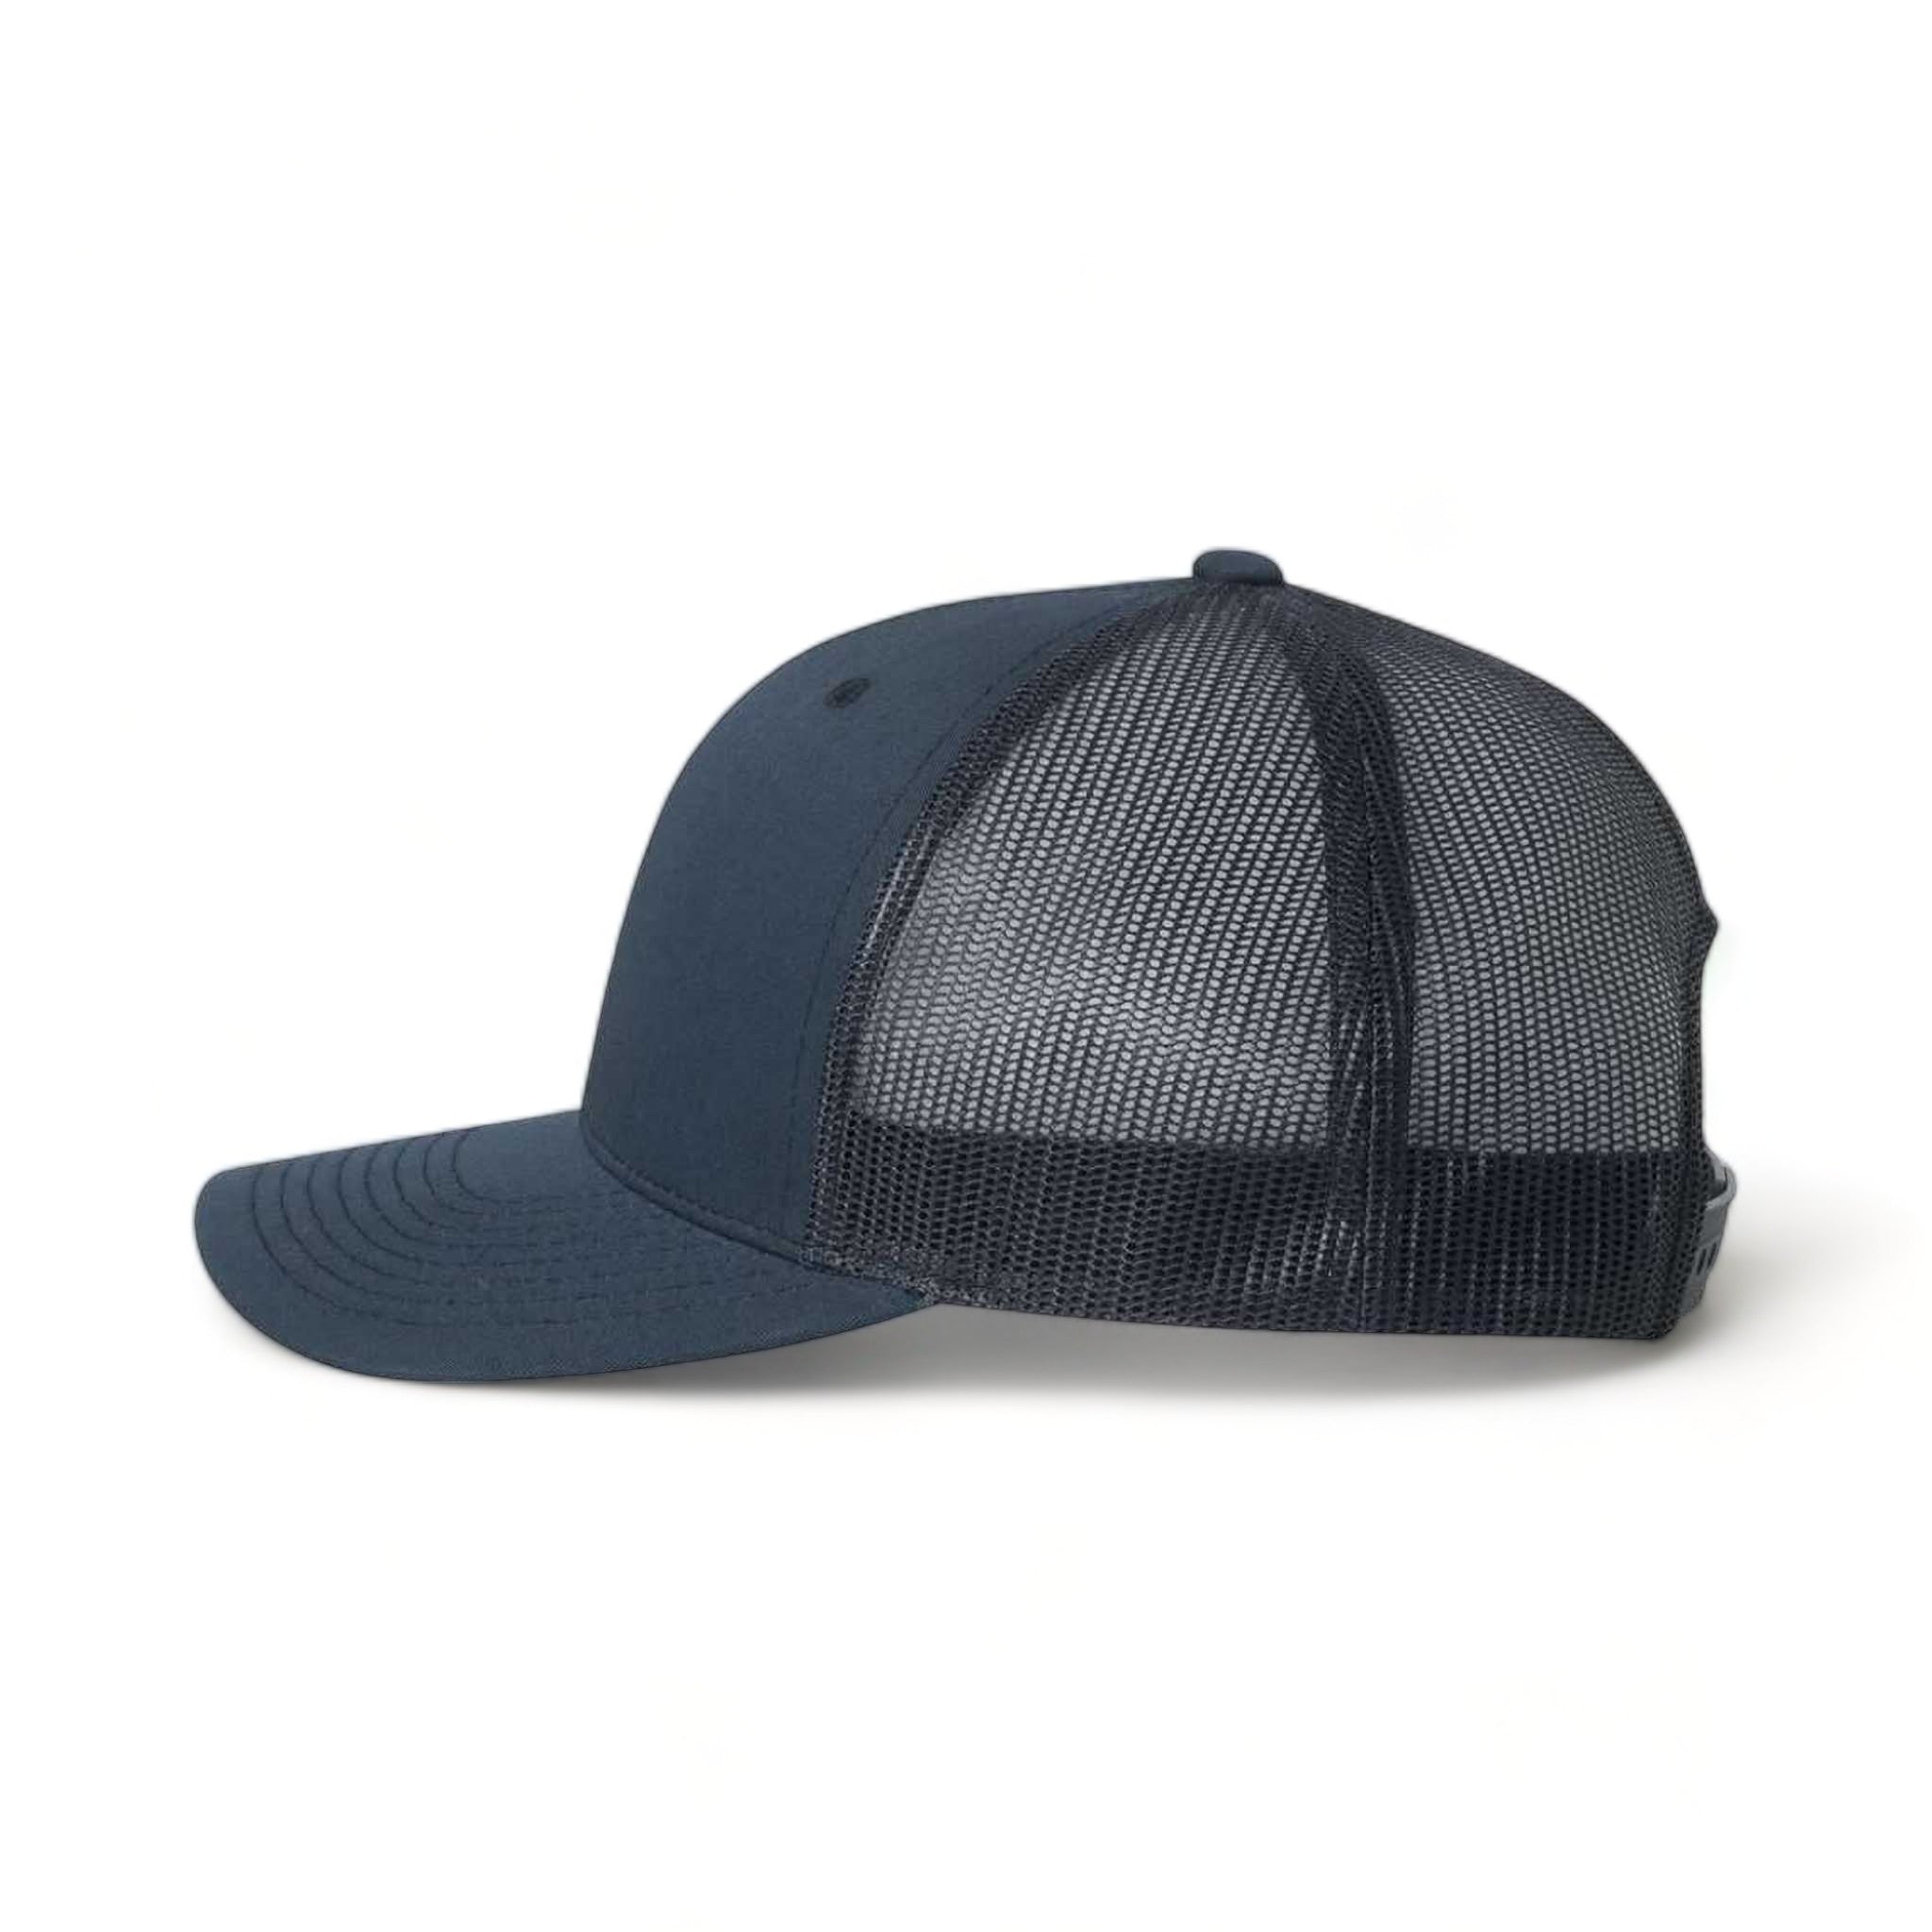 Side view of YP Classics 6606 custom hat in navy